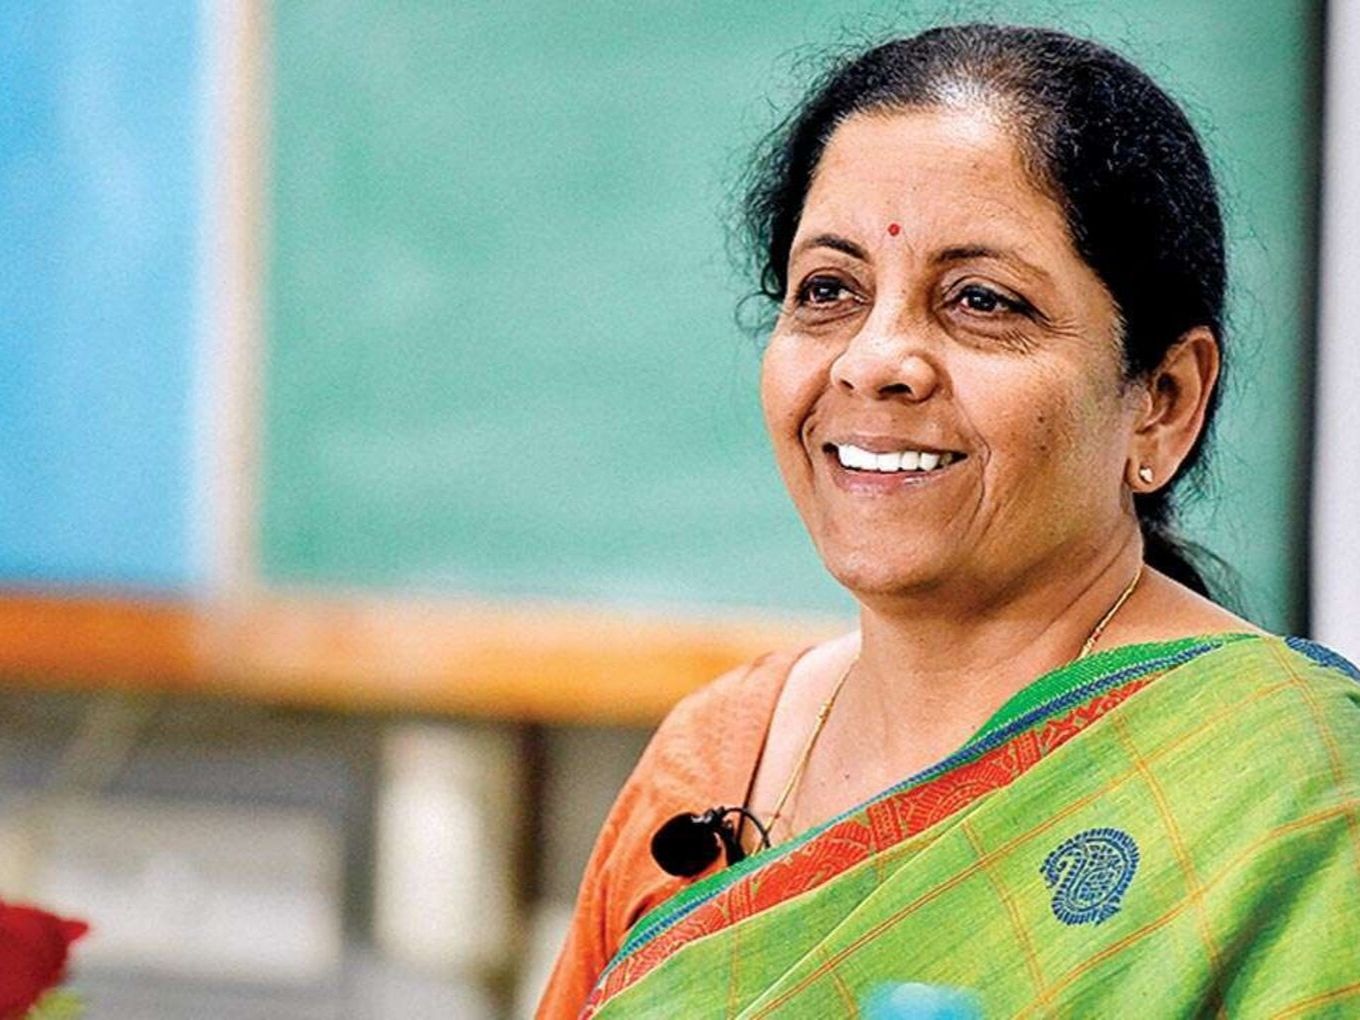 Sitharaman Says Other Nations Agree With India On Cryptocurrency Stand